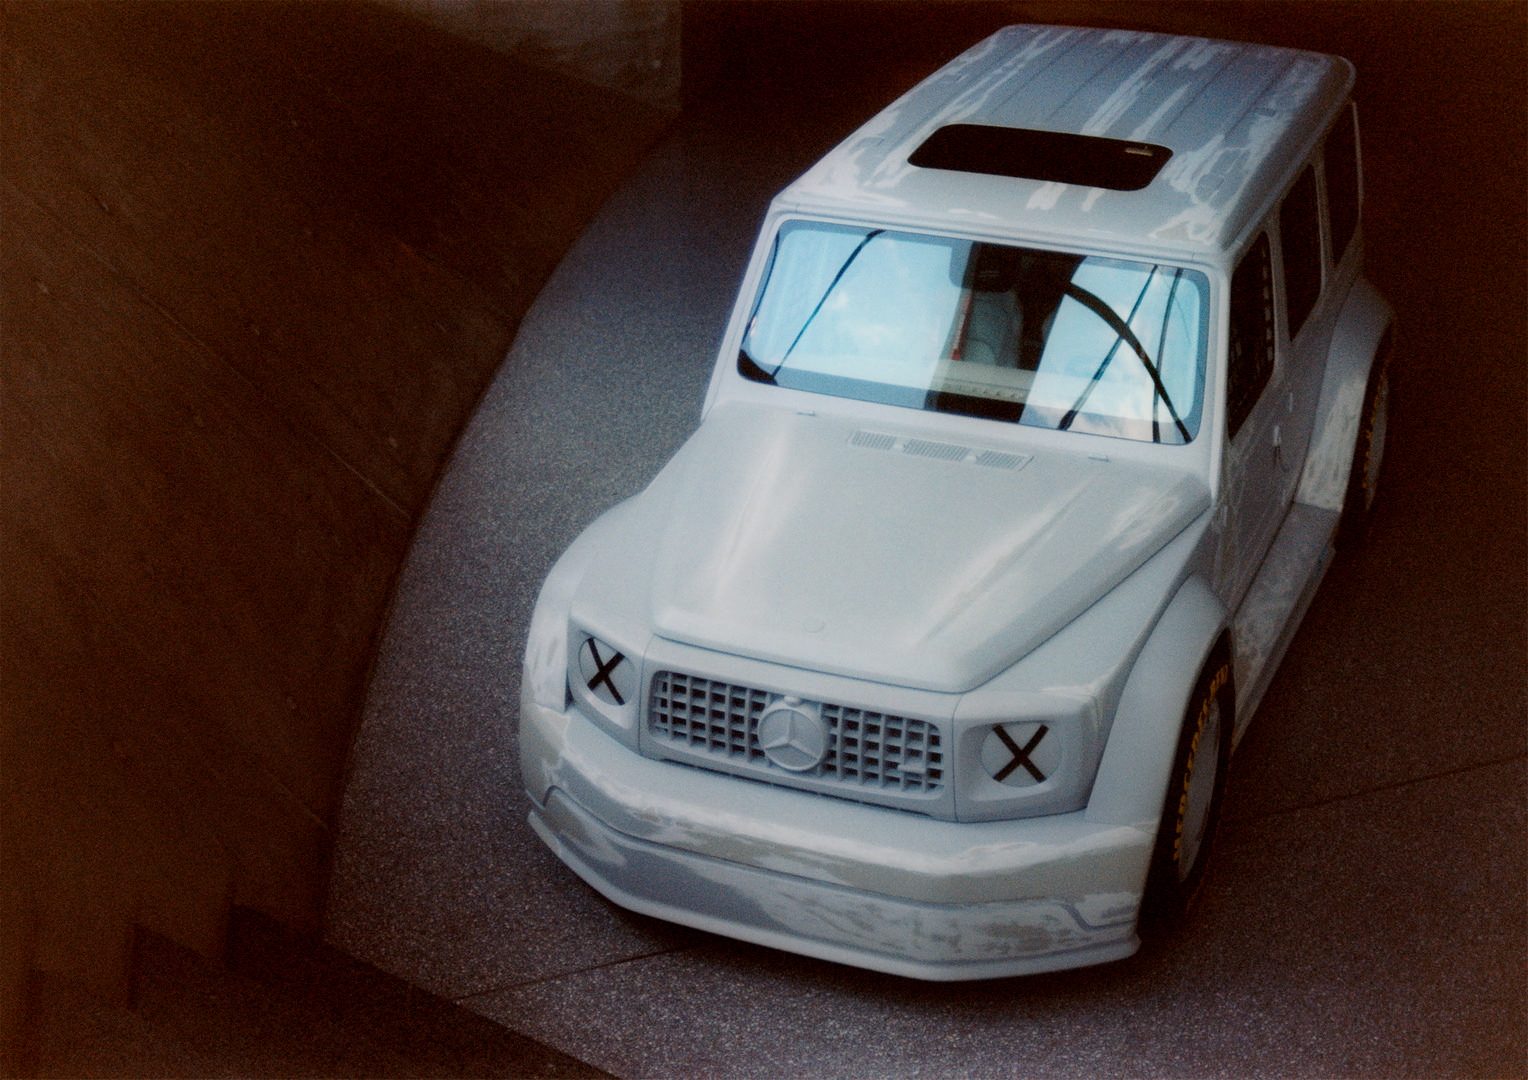 MERCEDES BENZ X VIRGIL ABLOH, PROJECT GELÄNDEWAGEN 1:3 SCALE MAQUETTE, Contemporary Curated, 2020